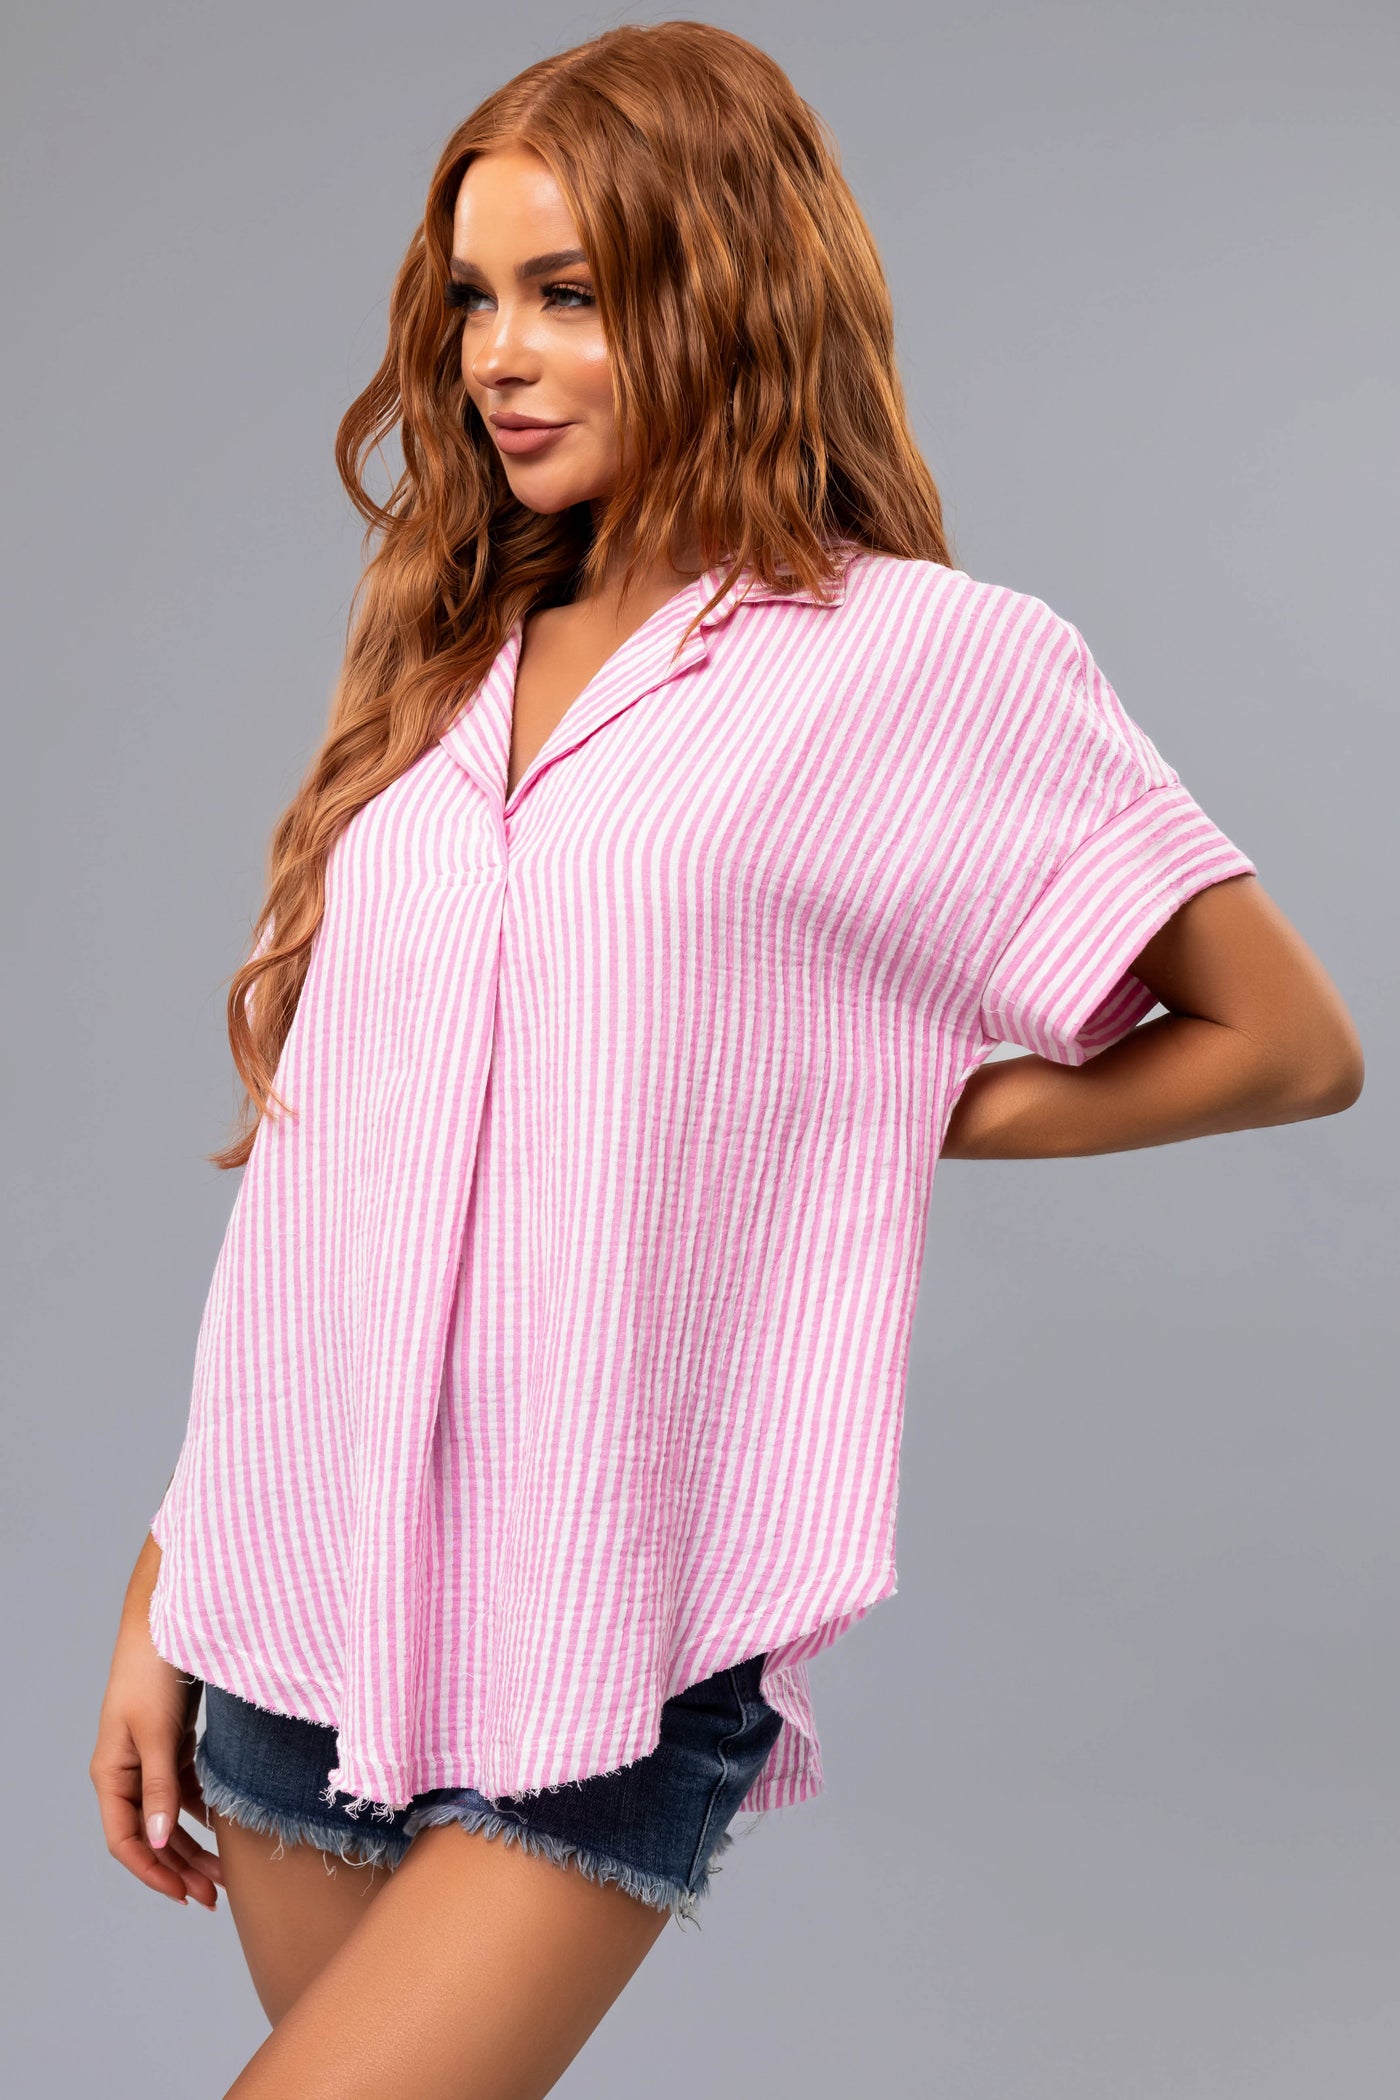 Baby Pink Striped Collared Short Sleeve Top